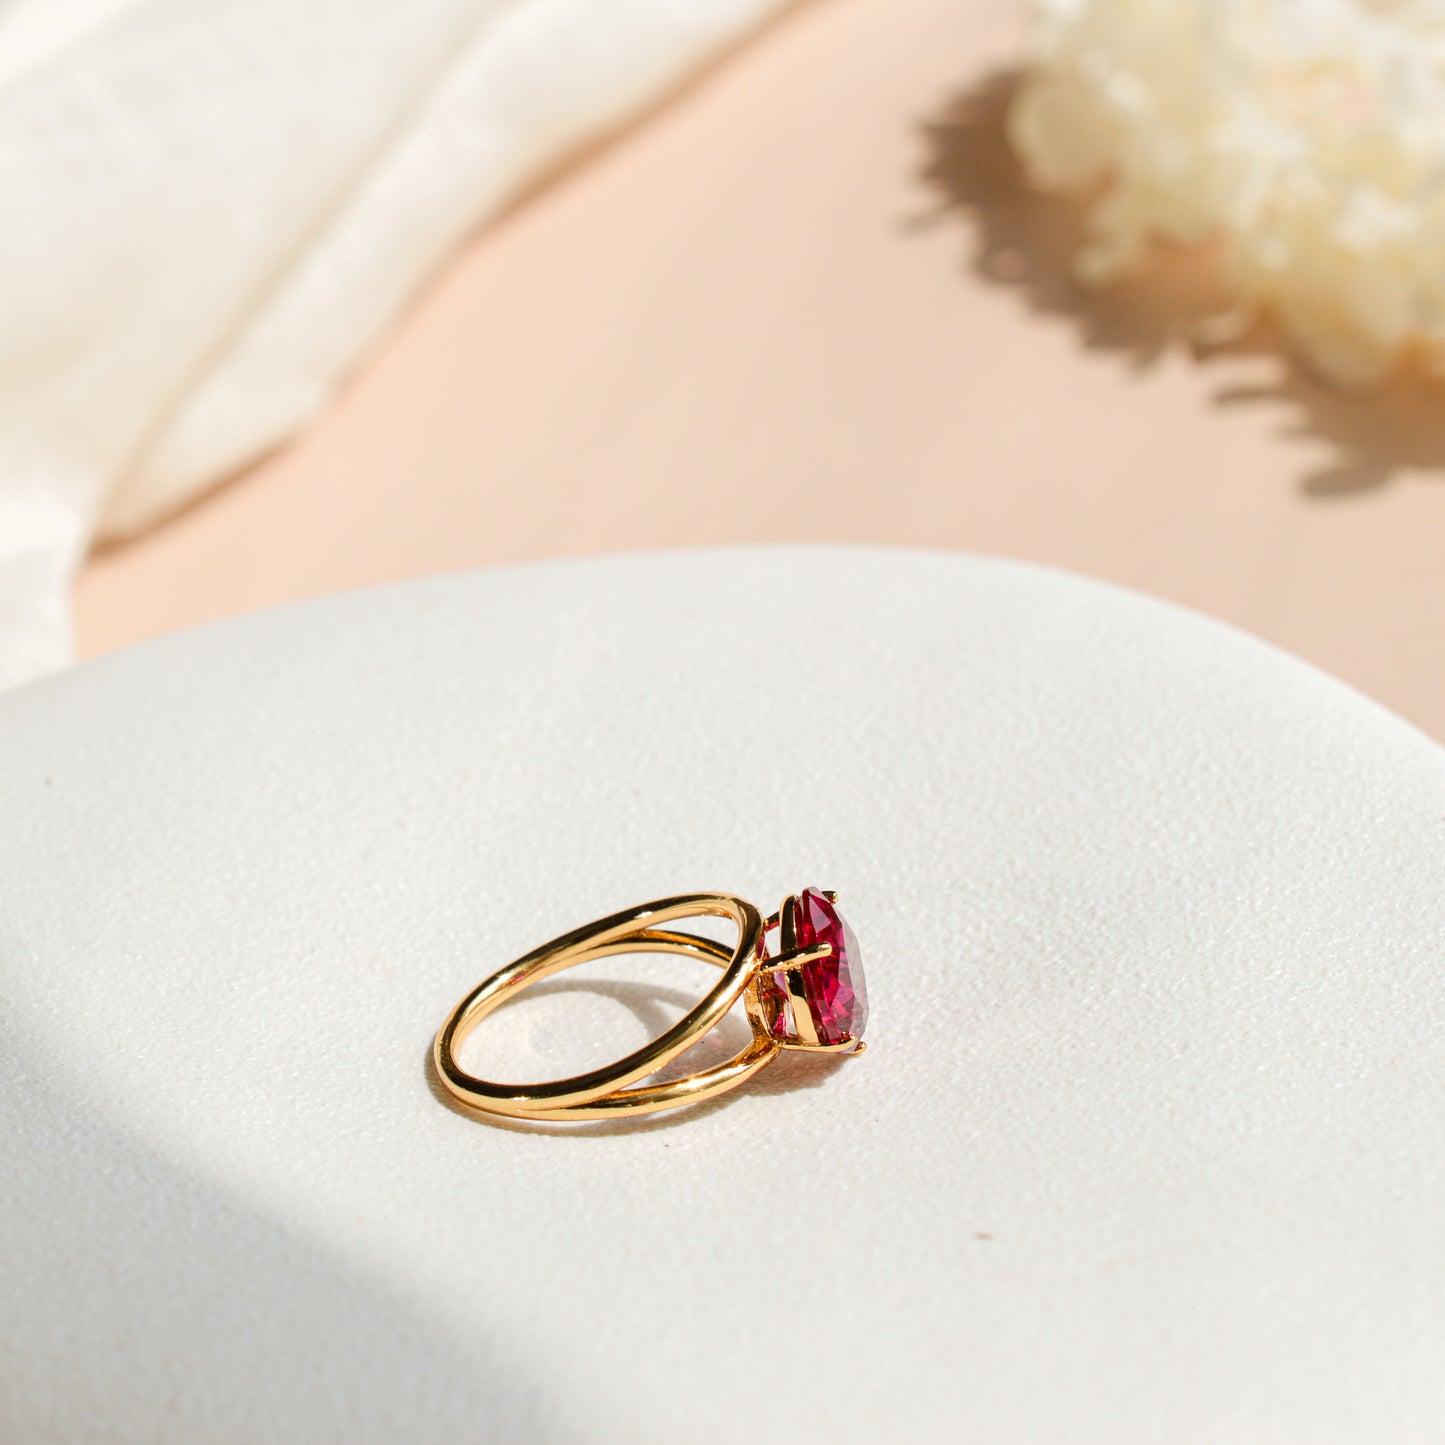 Faceted Ruby Ring Gold Vermeil